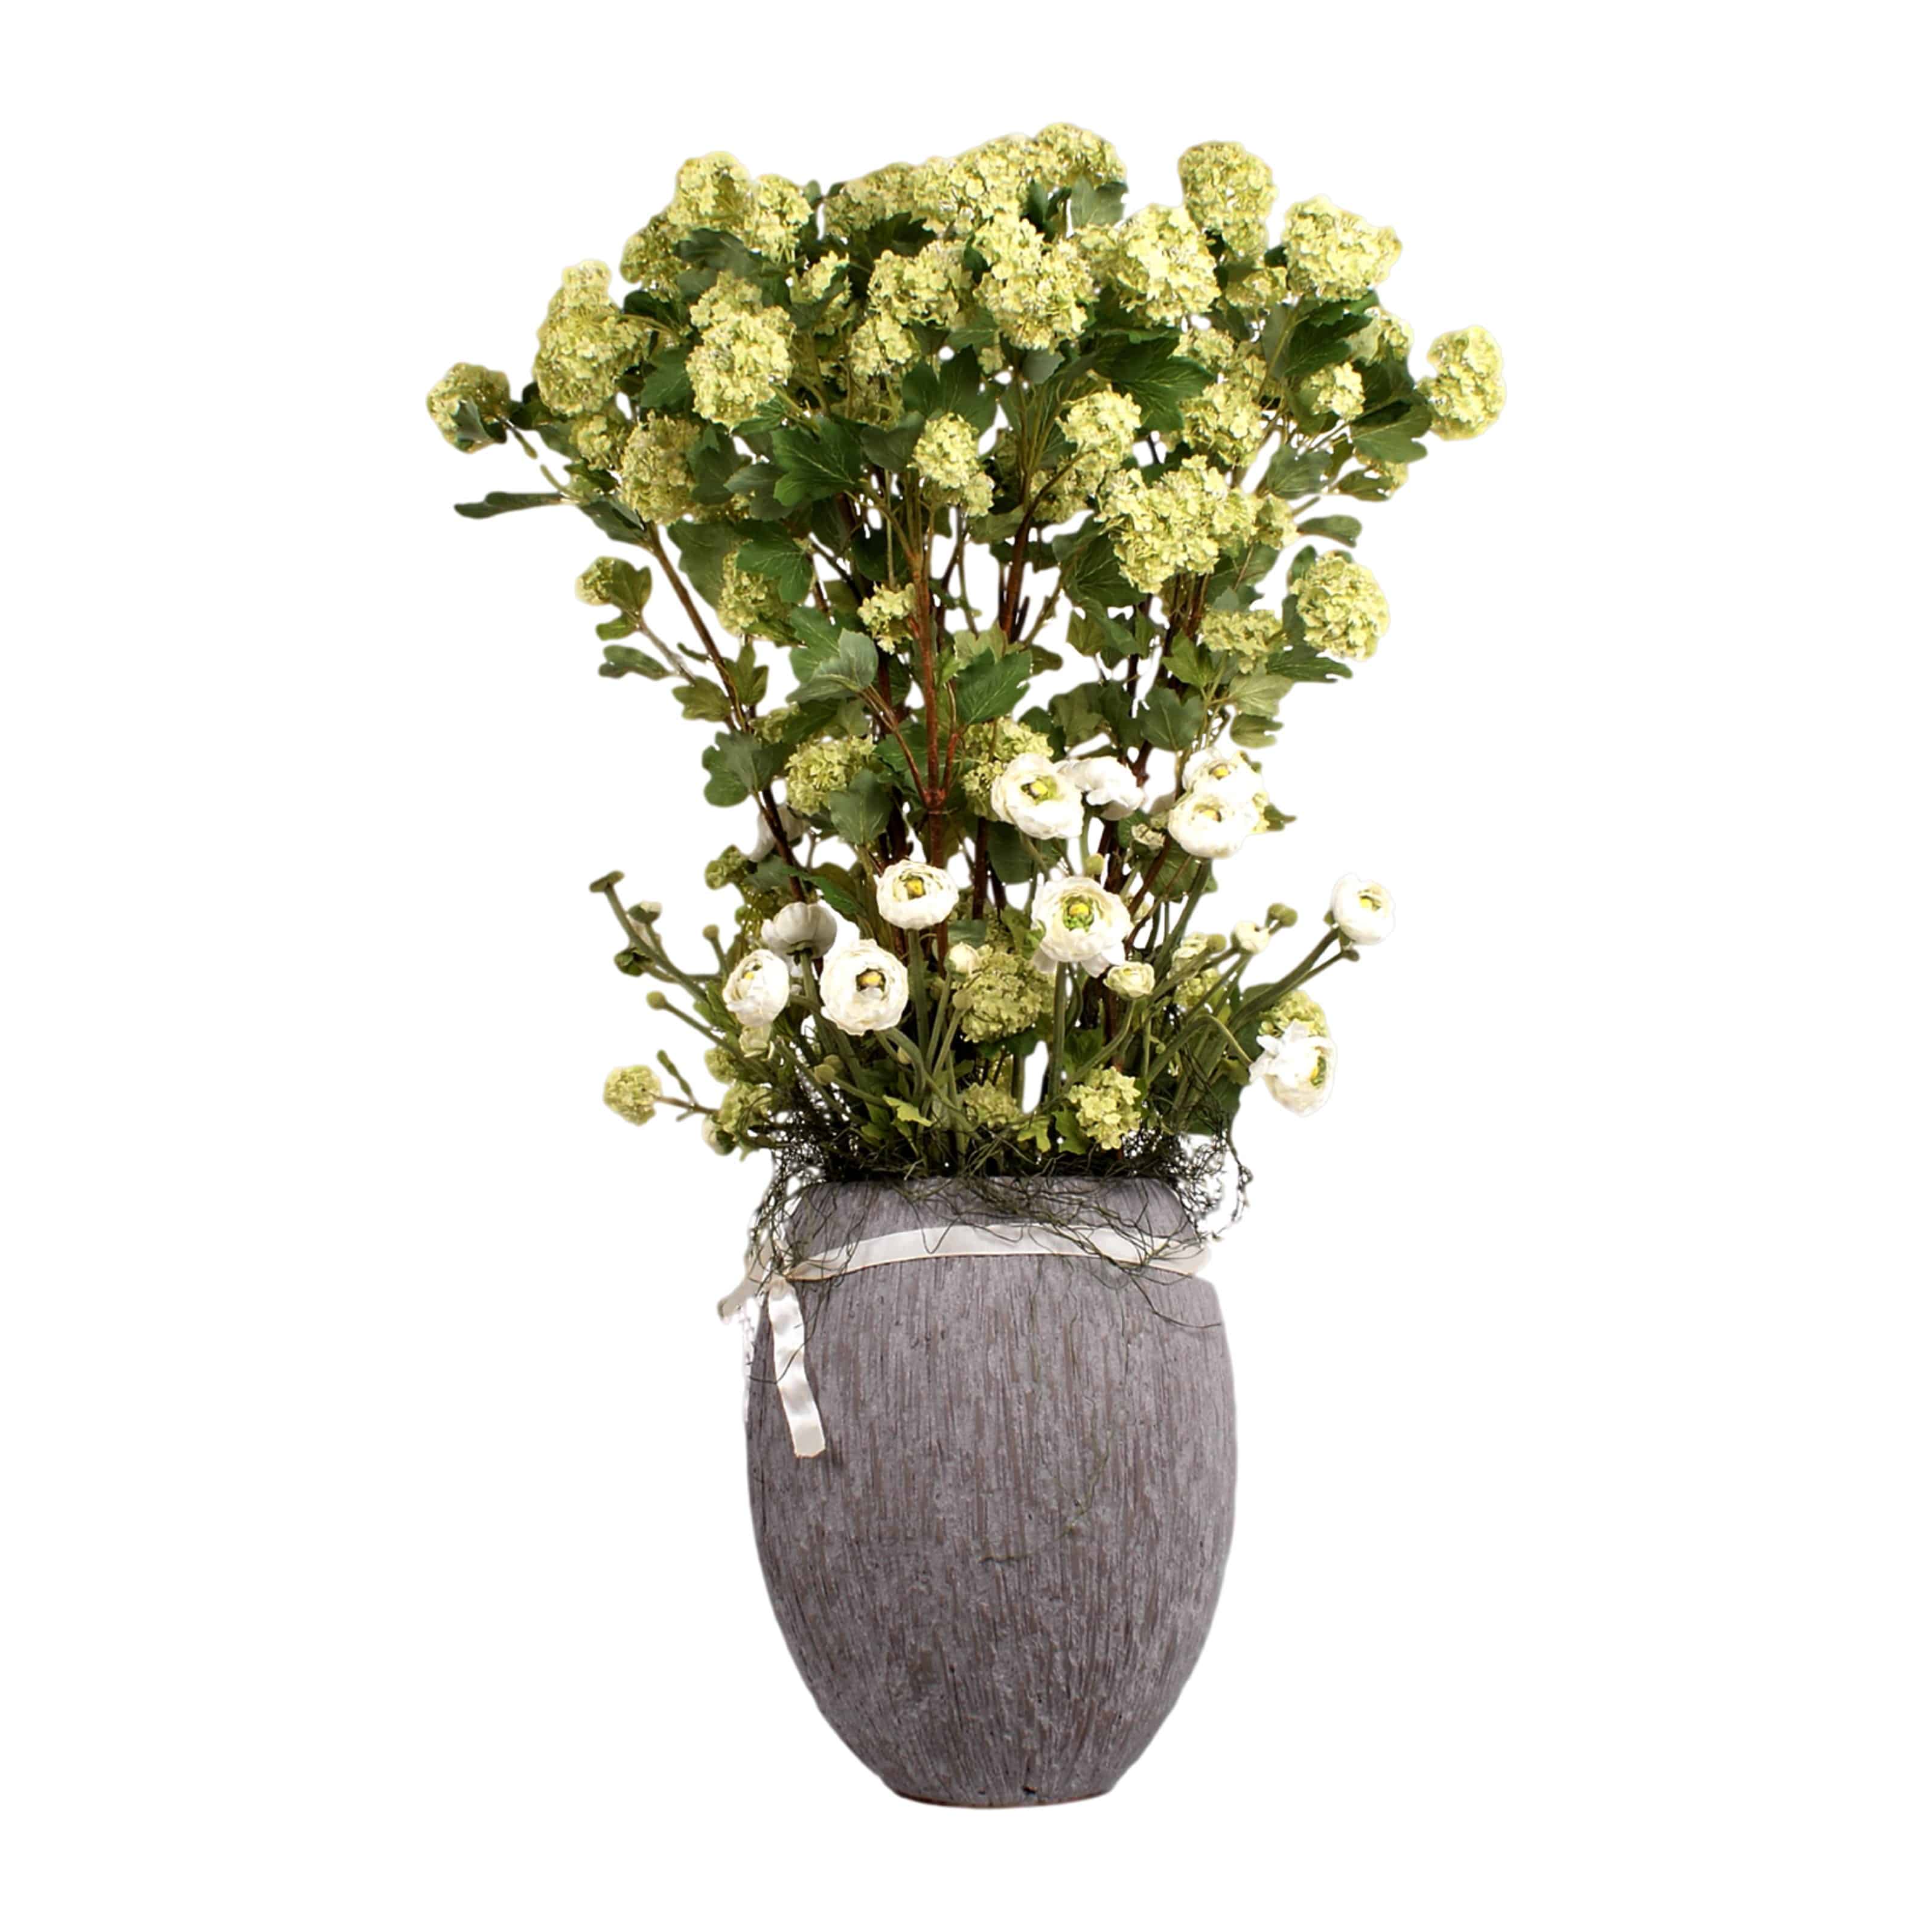 Buy our refreshing soft green flowering silk guelder rose arrangement with ranunculus silk flowers and natural looking pollen